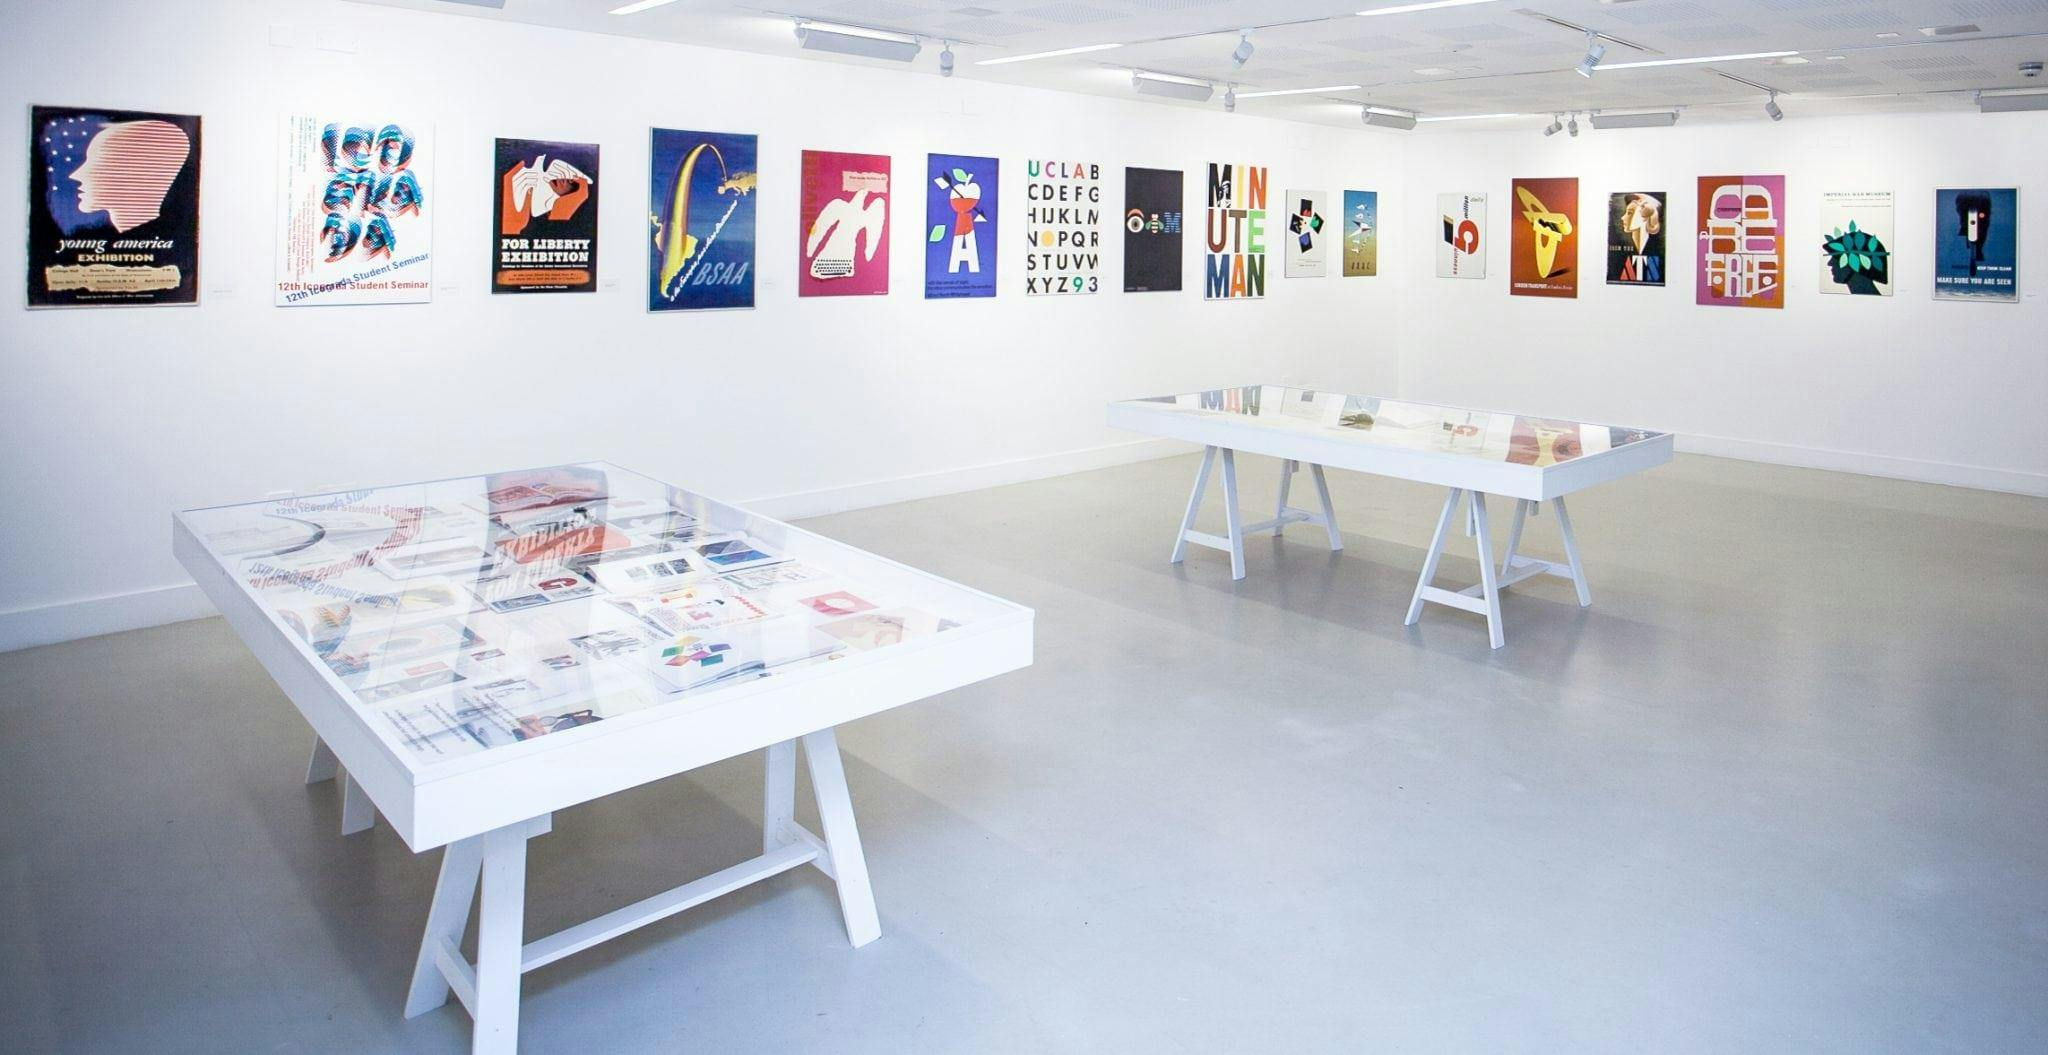 Colourful posters displayed on TheGallery's walls with two tables in the middle of the room.